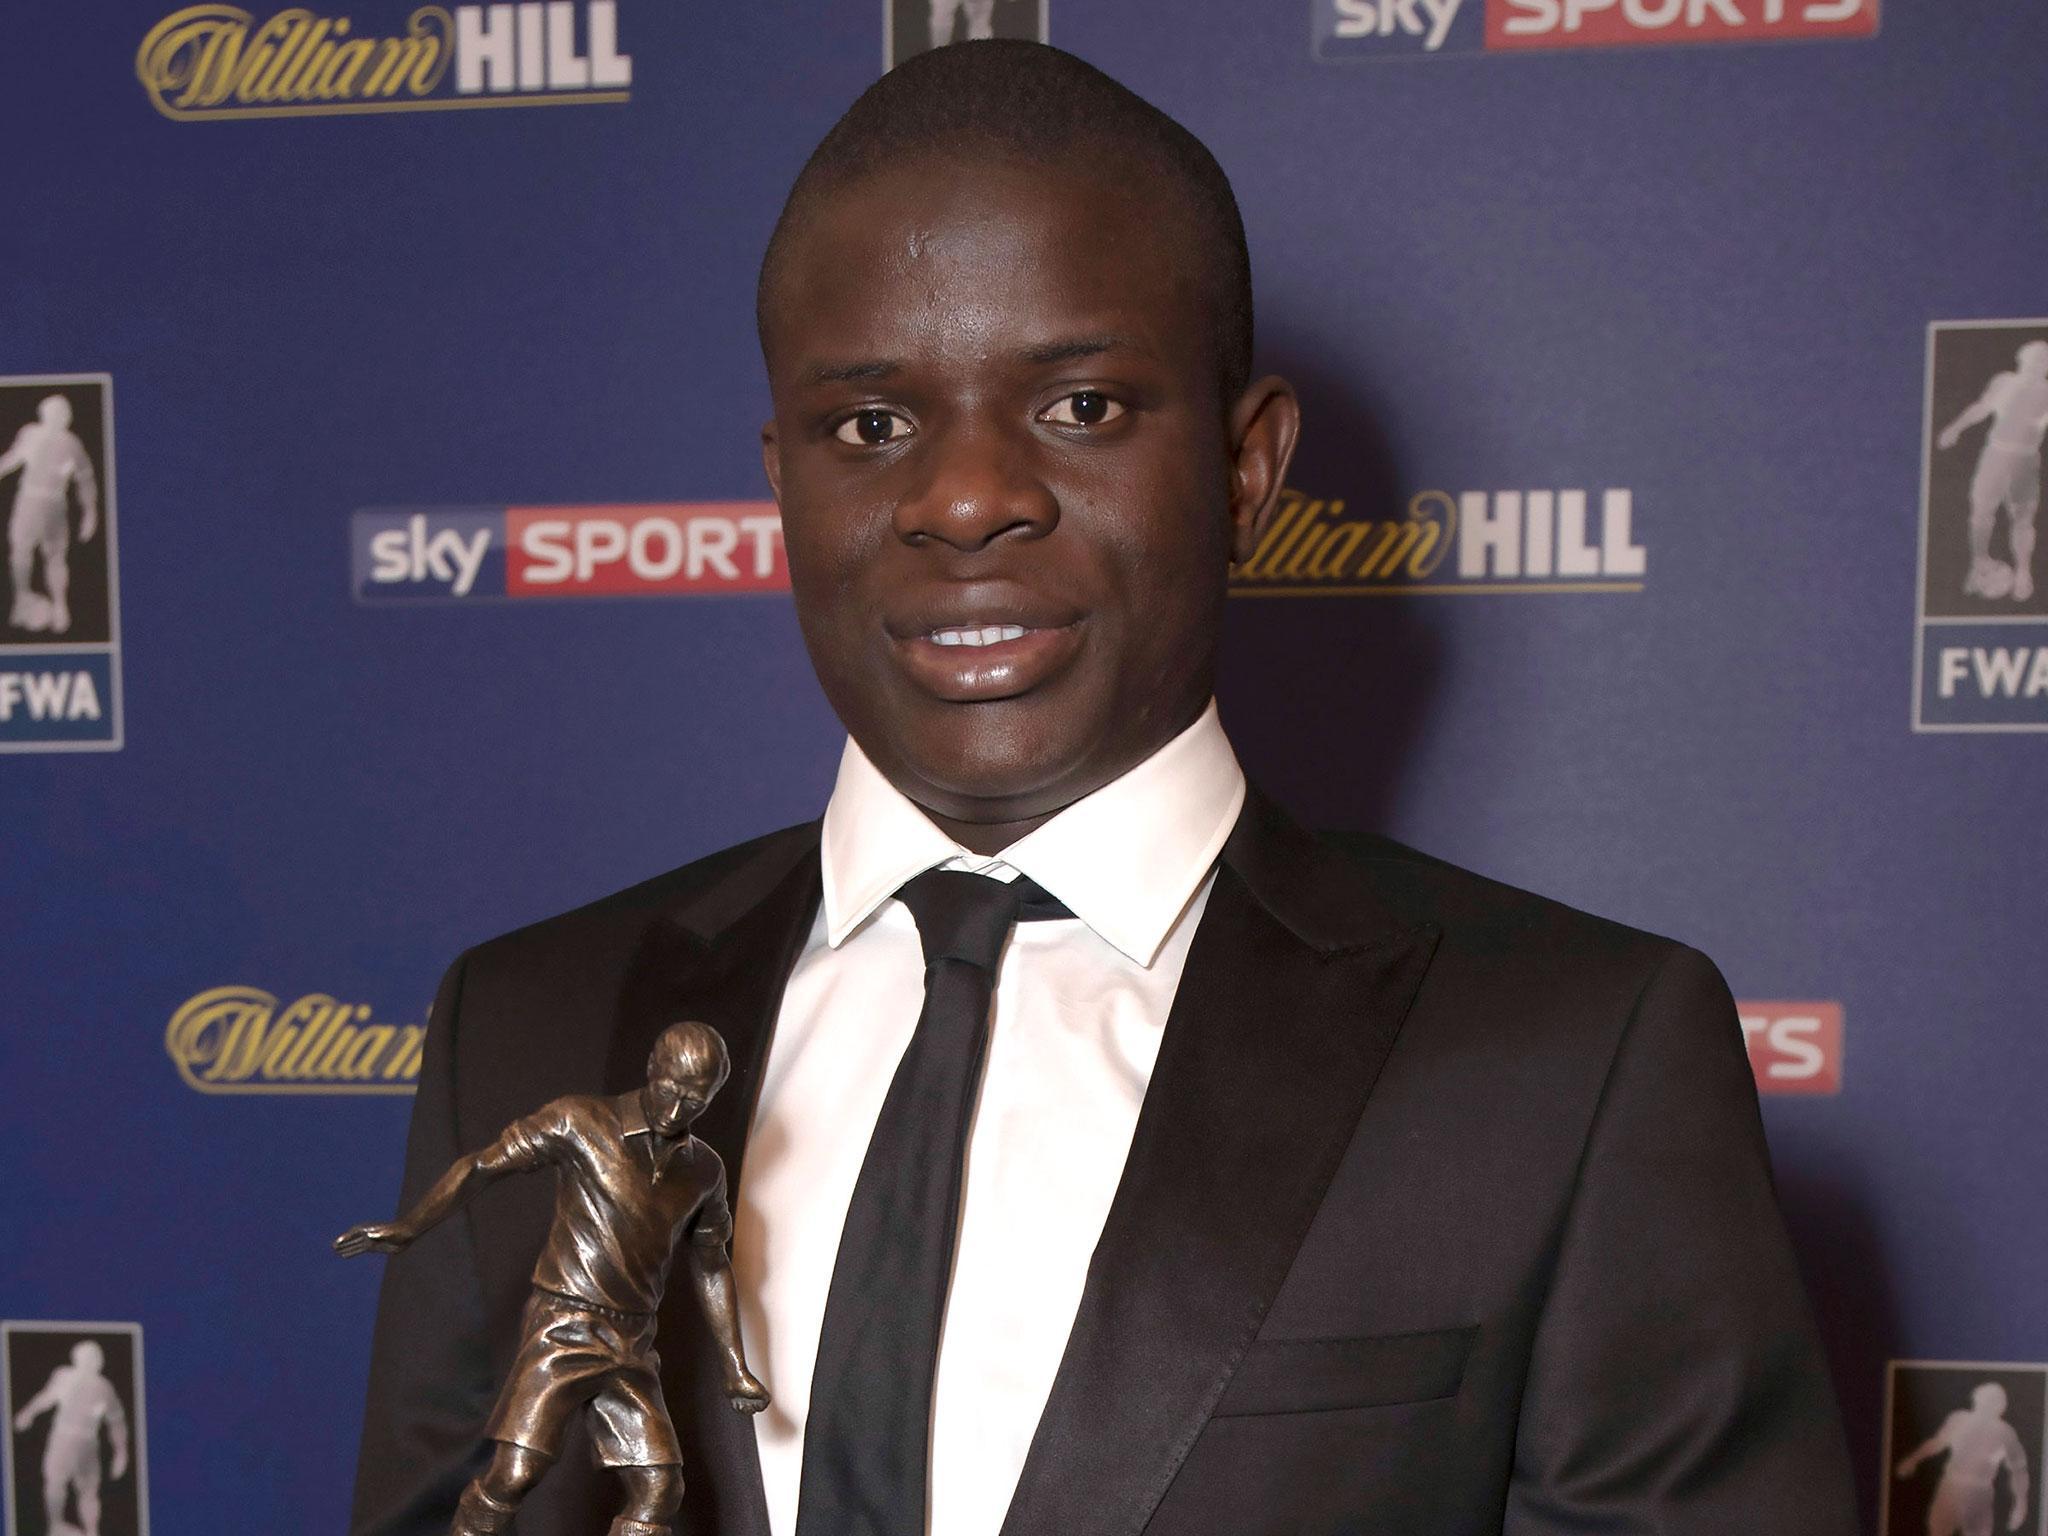 N'Golo Kante added another individual award after a fine first season for Chelsea